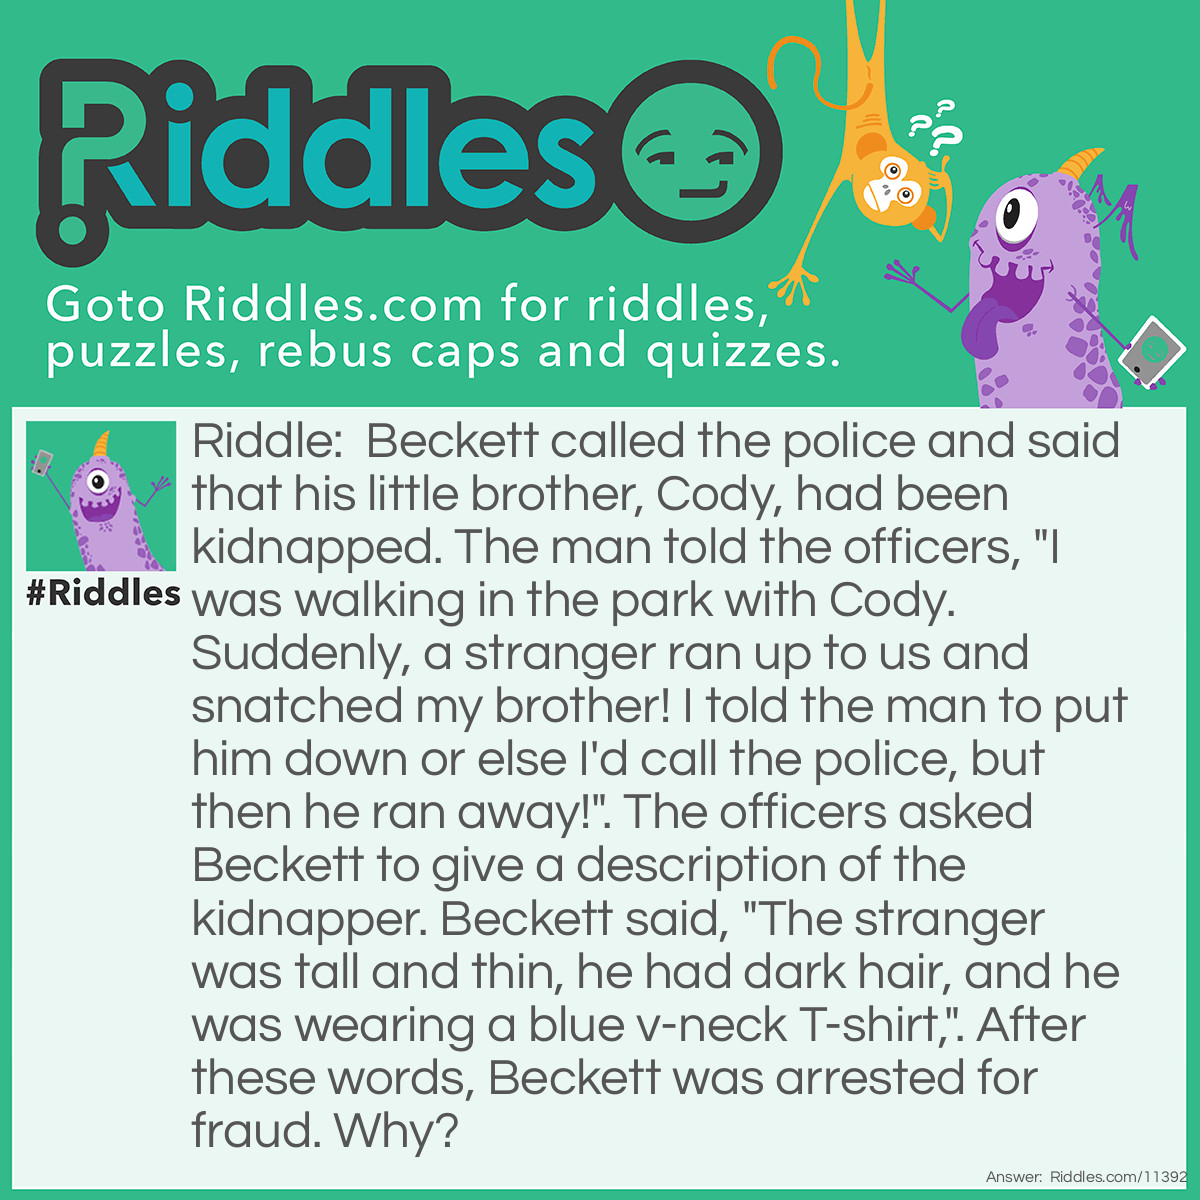 Riddle: Beckett called the police and said that his little brother, Cody, had been kidnapped. The man told the officers, "I was walking in the park with Cody. Suddenly, a stranger ran up to us and snatched my brother! I told the man to put him down or else I'd call the police, but then he ran away!". The officers asked Beckett to give a description of the kidnapper. Beckett said, "The stranger was tall and thin, he had dark hair, and he was wearing a blue v-neck T-shirt,". After these words, Beckett was arrested for fraud. Why? Answer: If the supposed stranger was running away from Beckett, the guy couldn't have seen that he was wearing a v-neck T-shirt because the v-neck is normally seen in the front, but Beckett could only see the guy's back.